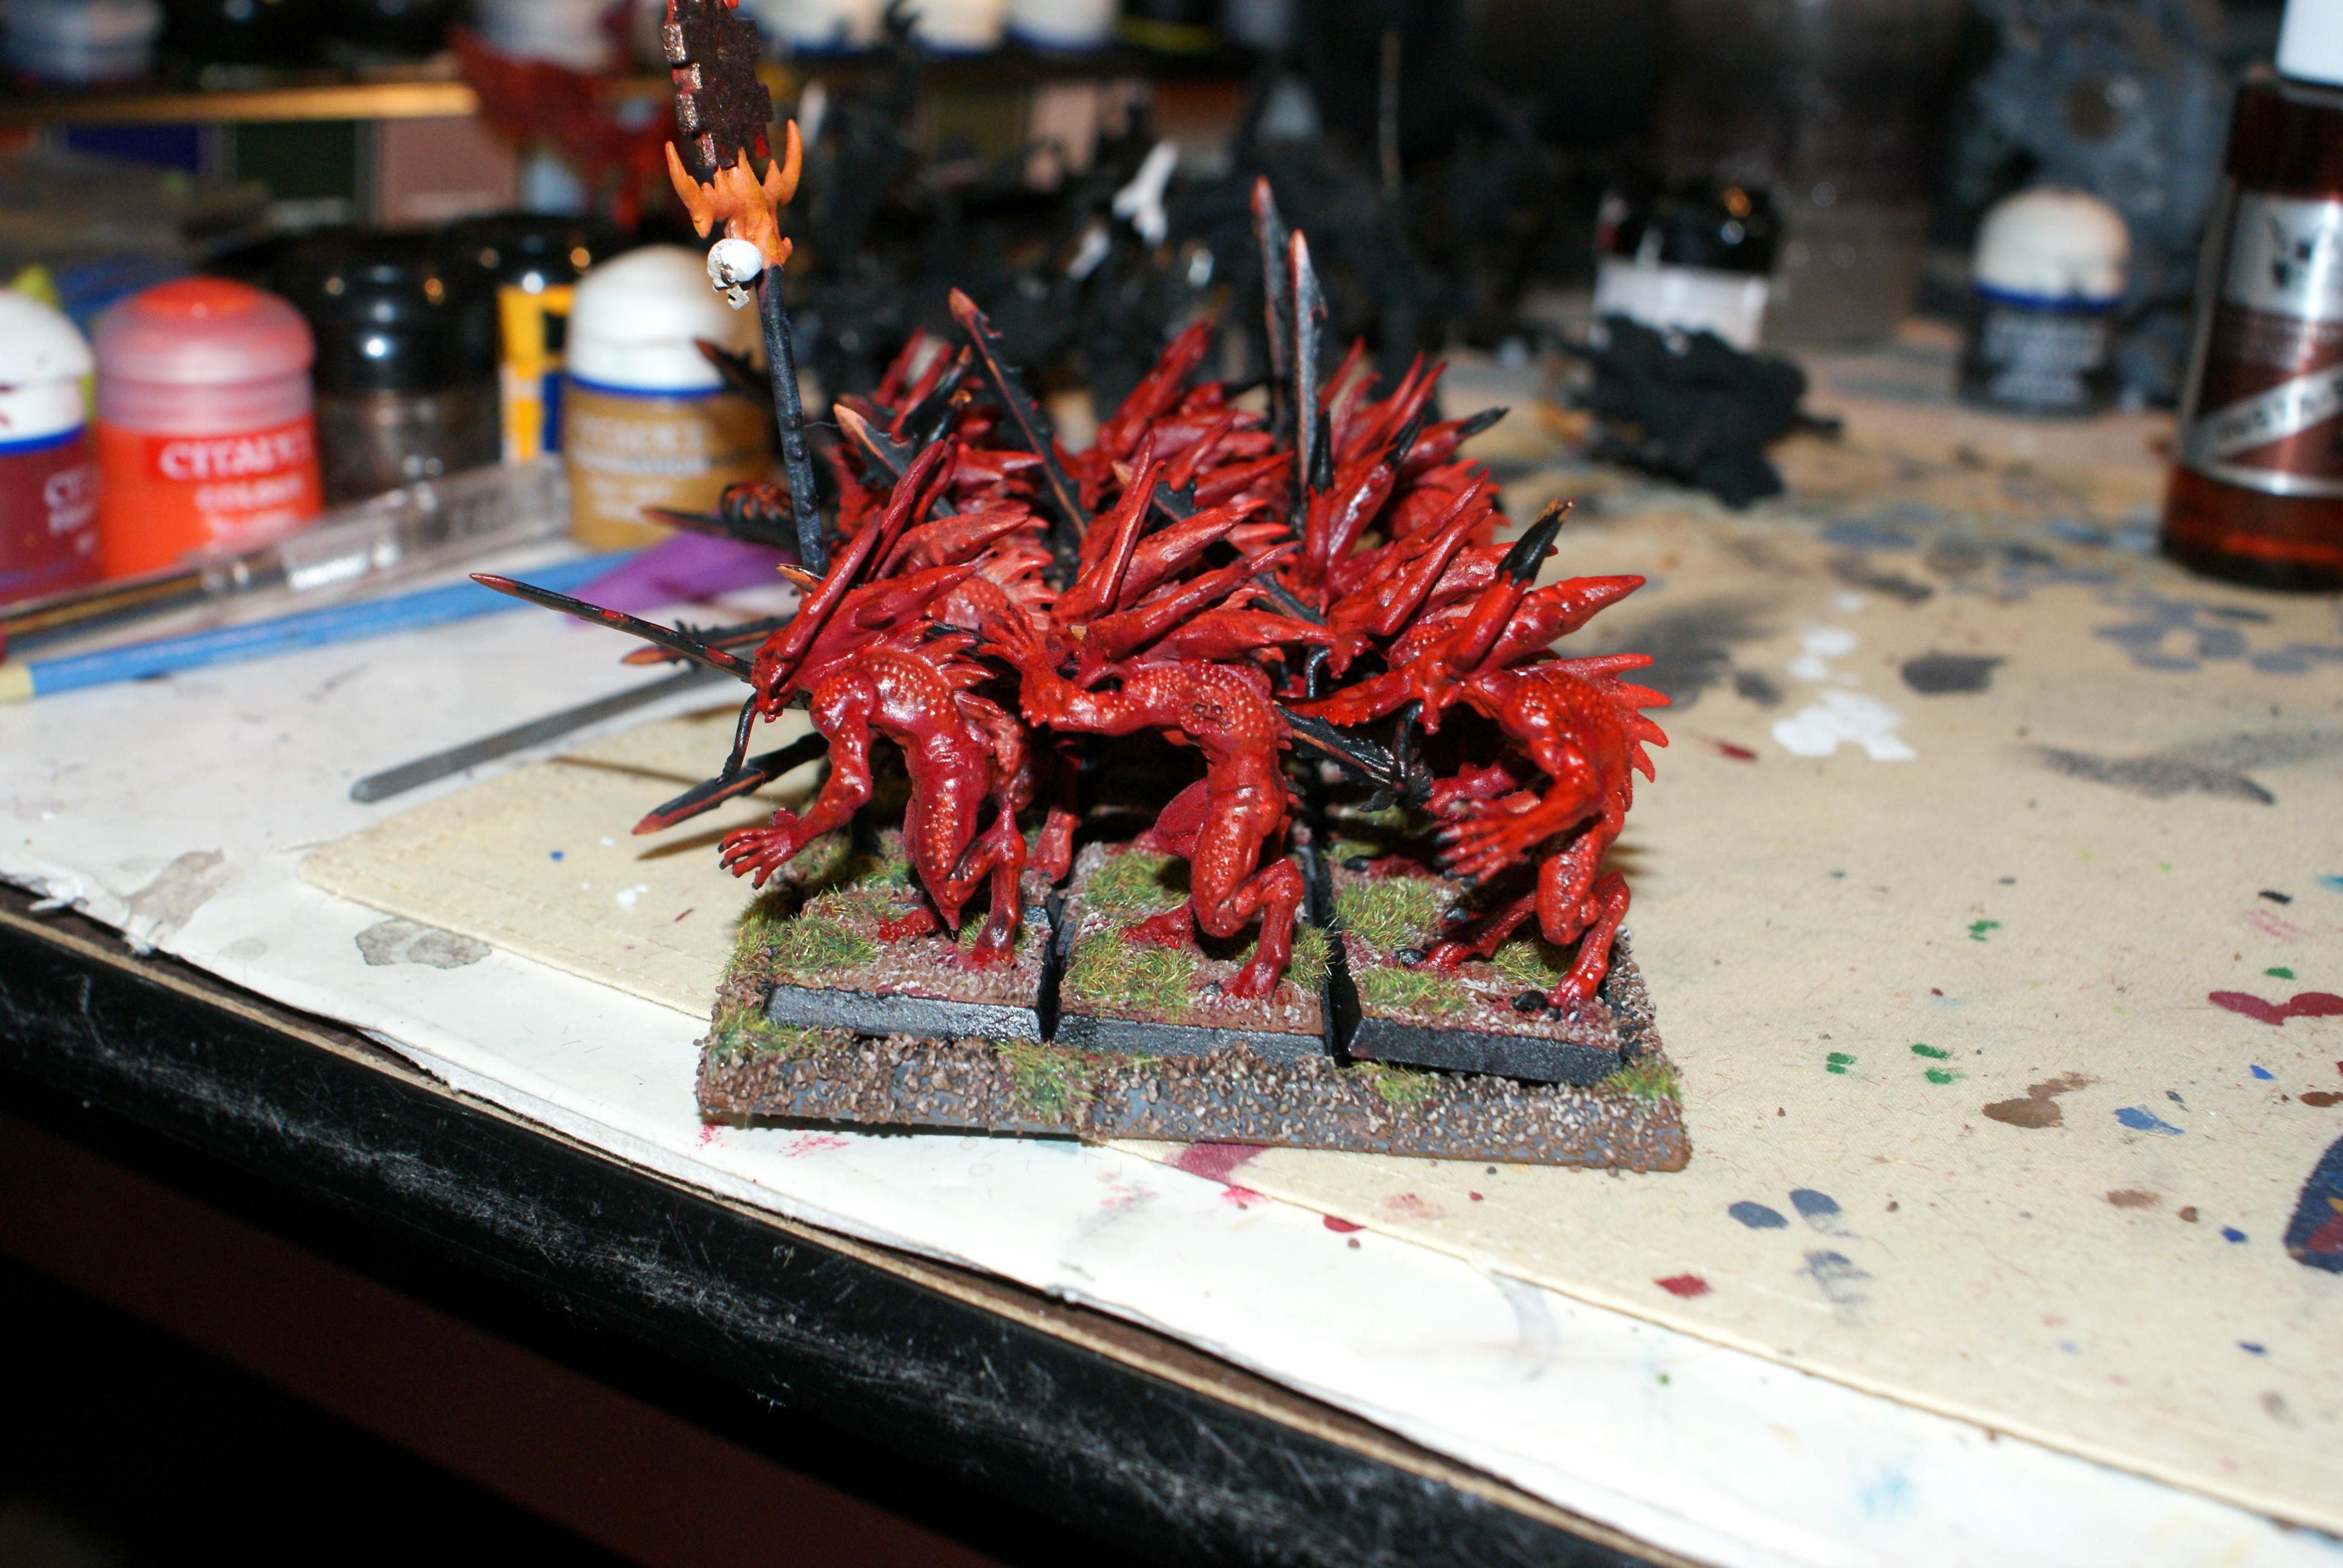 Bloodletters, Daemons Of Chaos